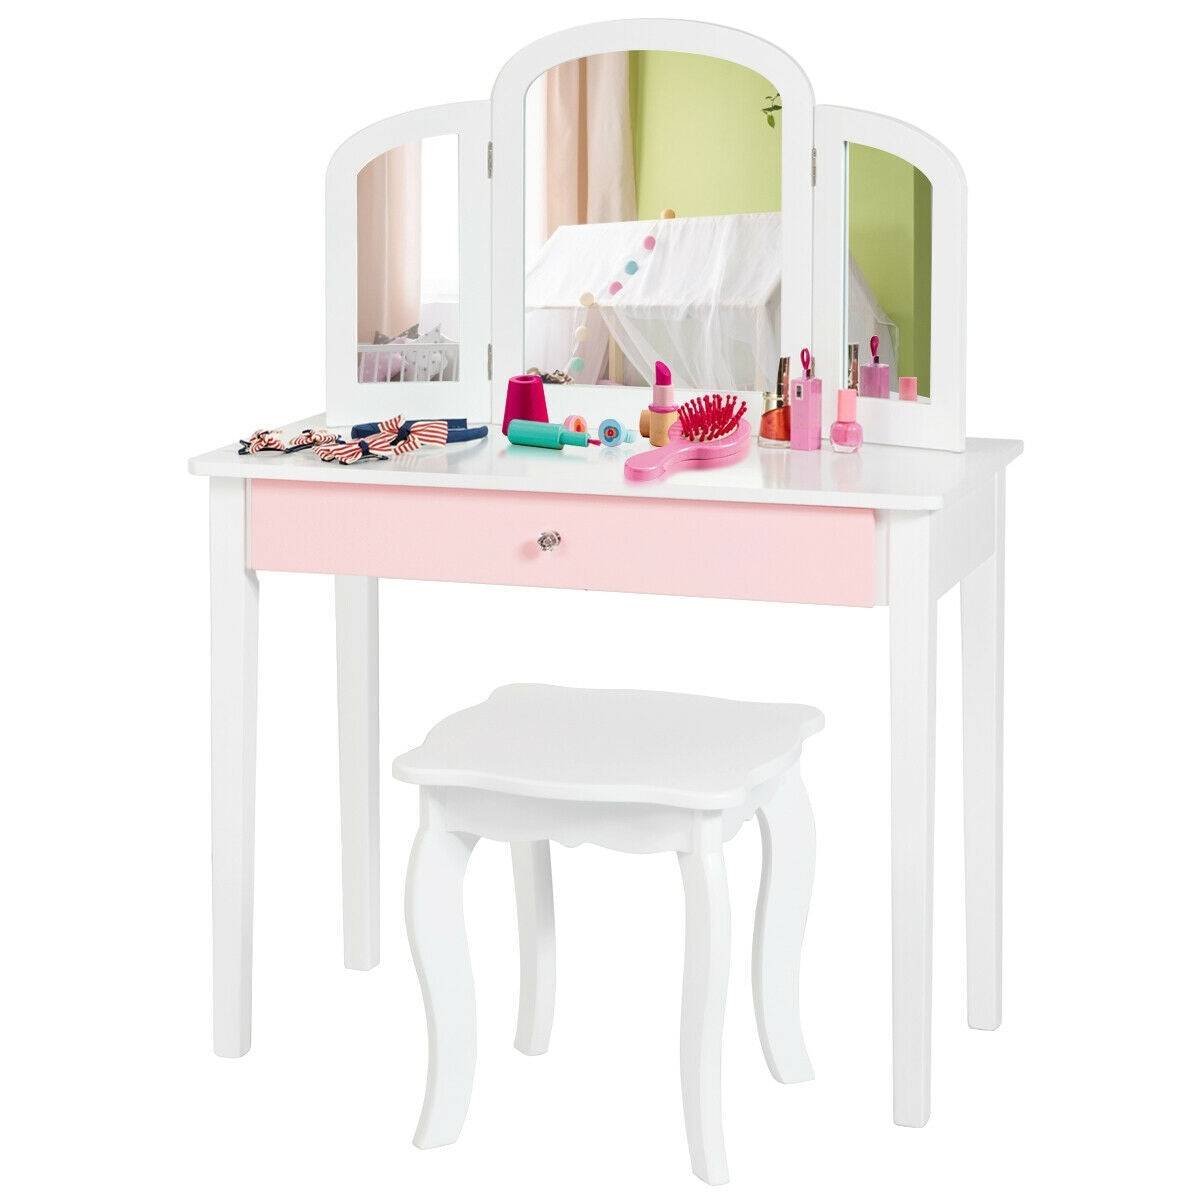 Kids Princess Make Up Dressing Table with Tri-folding Mirror and Chair-White - Color: White